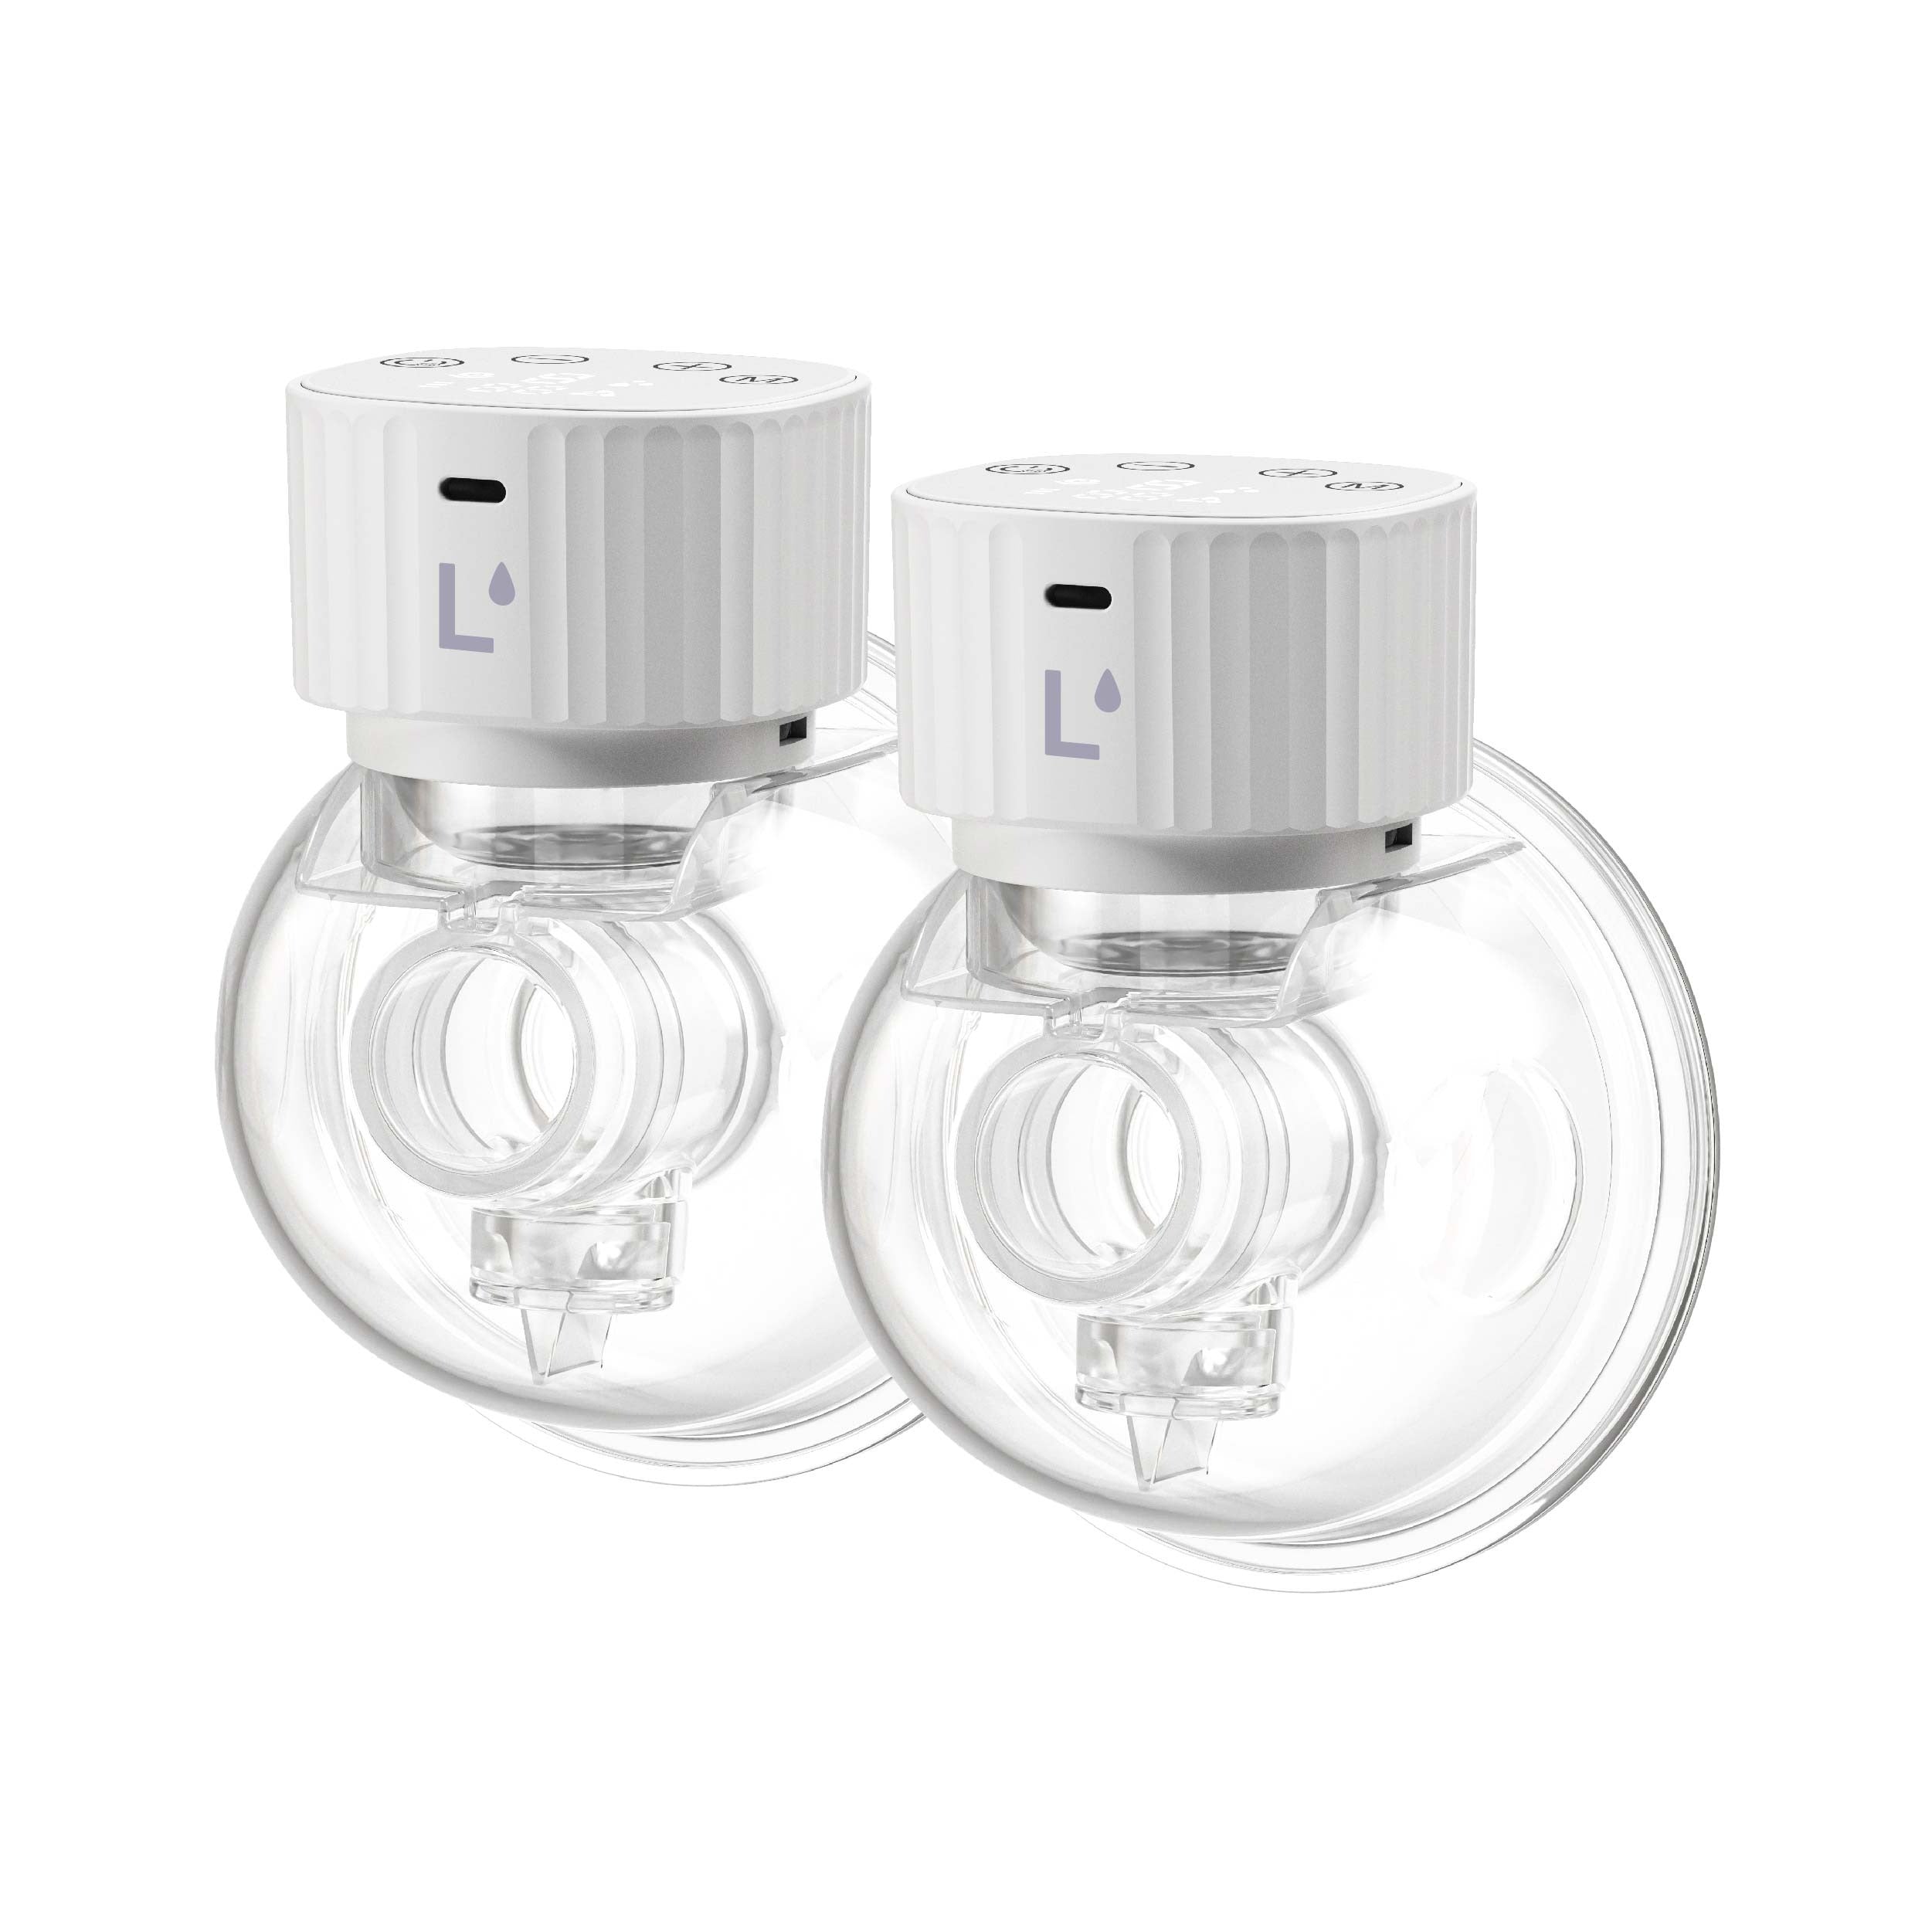 Lactivate ARIA Wearable Breast Pump - Duo Set - Tiny Tots Baby Store 